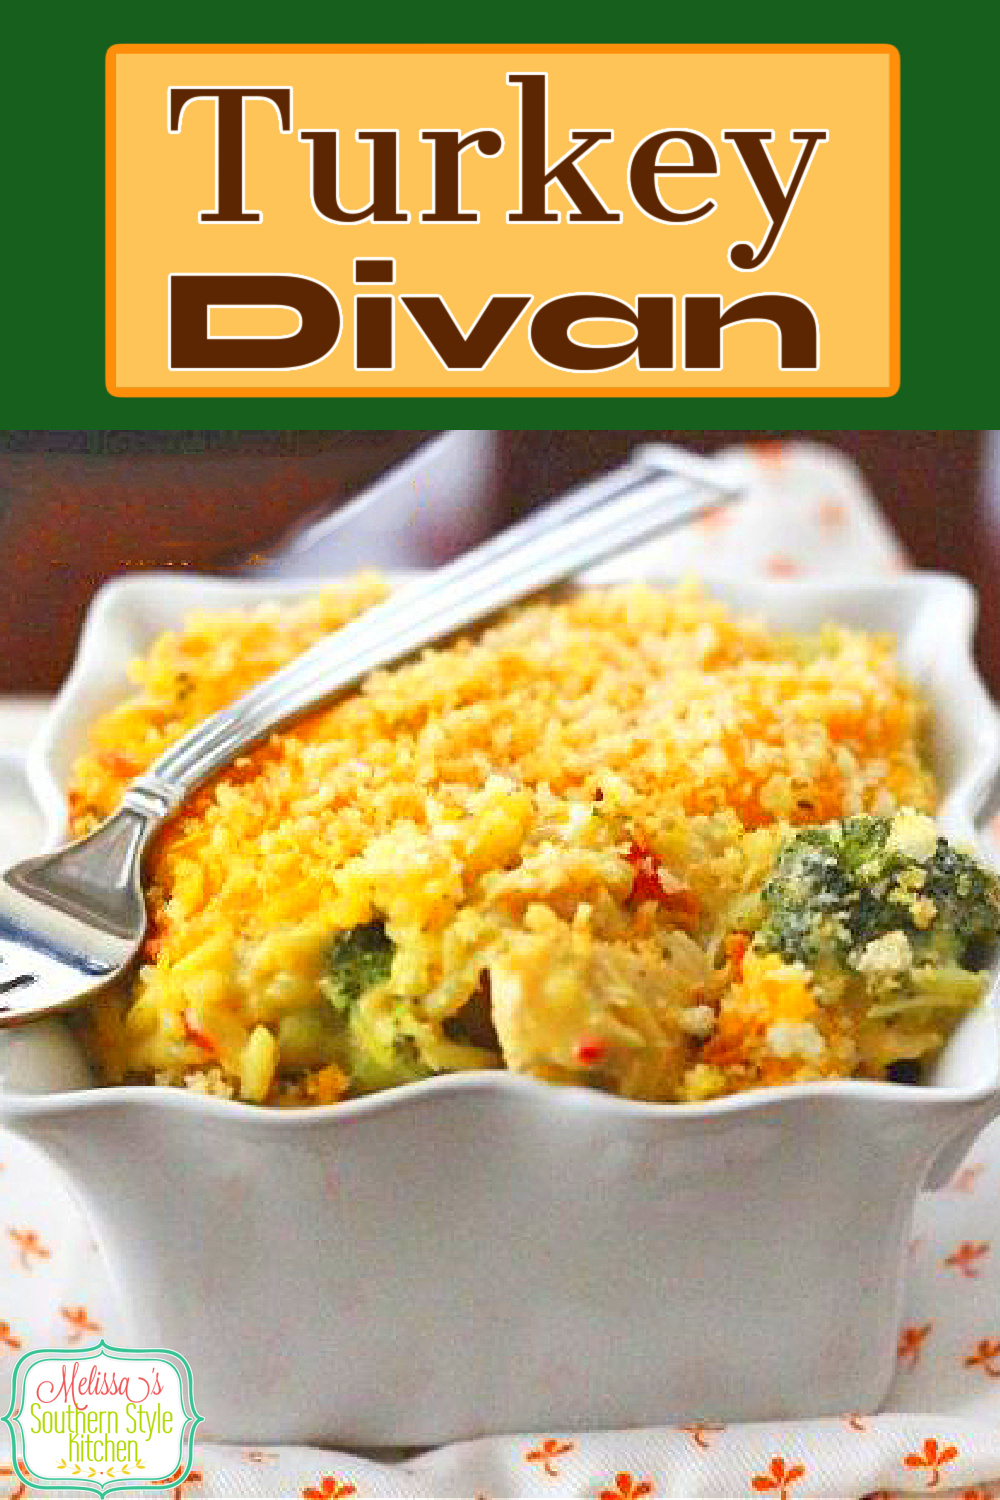 Turn leftover turkey into this Turkey Broccoli Rice Divan. It's equally delicious with chicken, and a tasty way to enjoy a round 2 meal #turkeydivan #chickendivan #chickenandrice #leftoverturkeyrecipes #turkeyrecipes #casseroles #dinnerideas #dinner #southernfood #southernrecipes #turkey #thanksgiving via @melissasssk